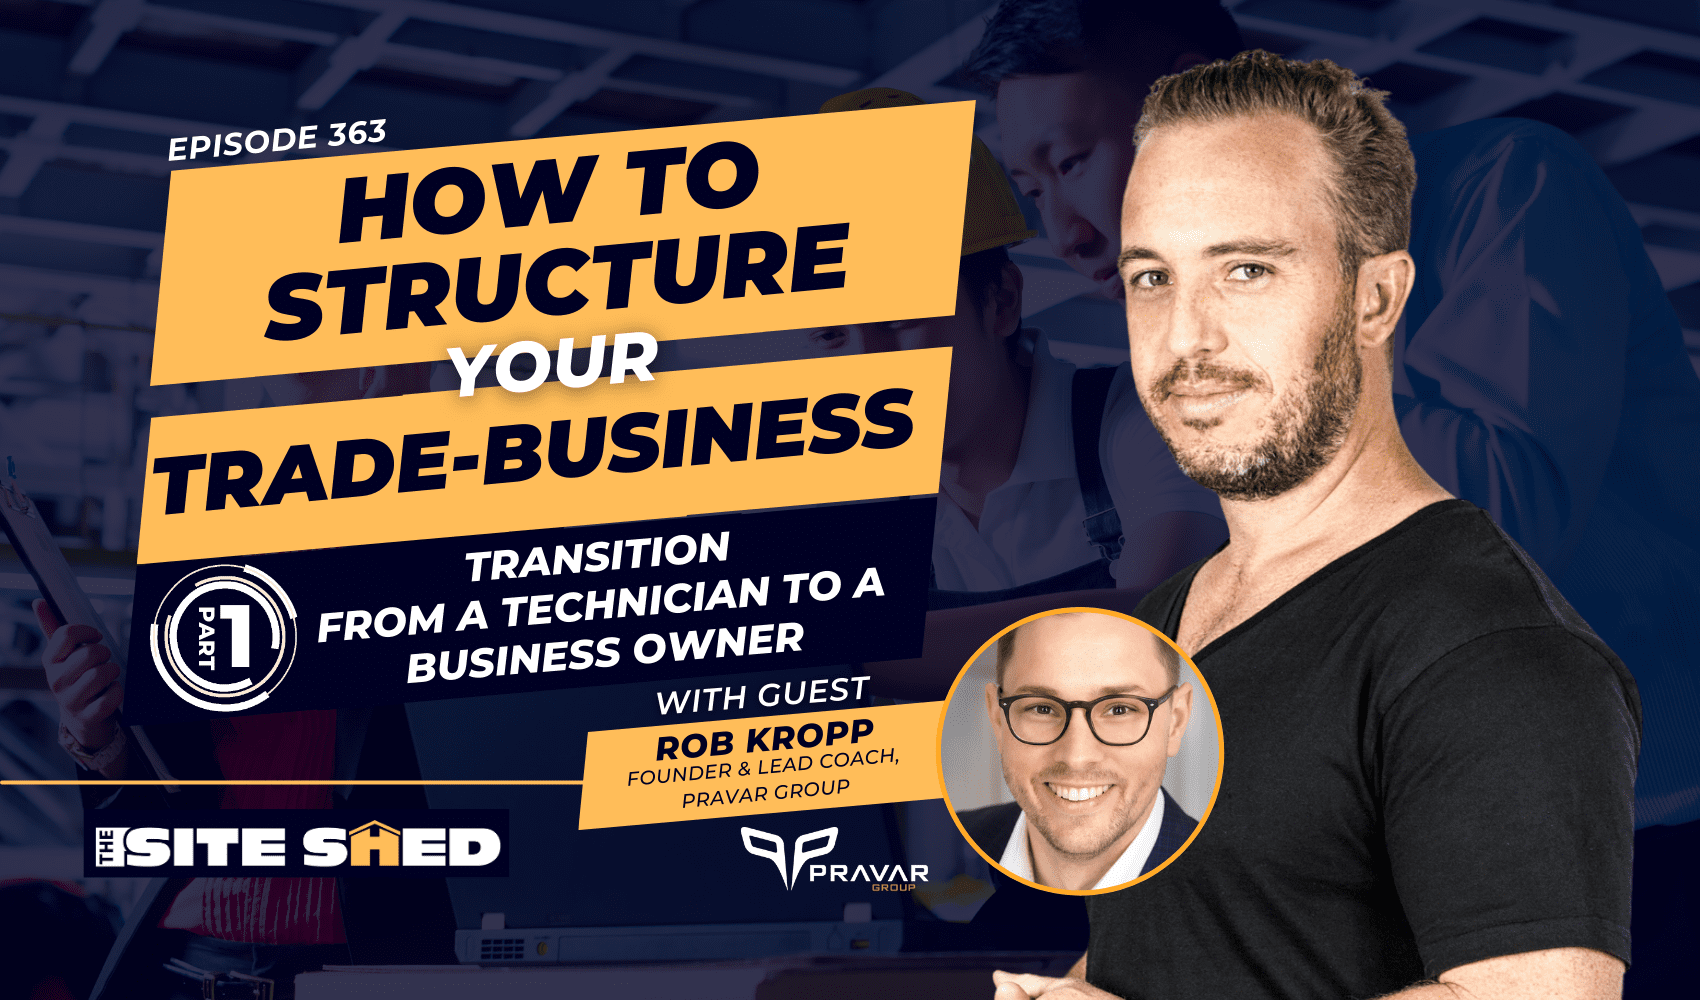 Part 1: Transition from a technician to a business owner | ft. Rob Kropp | Ep. 363